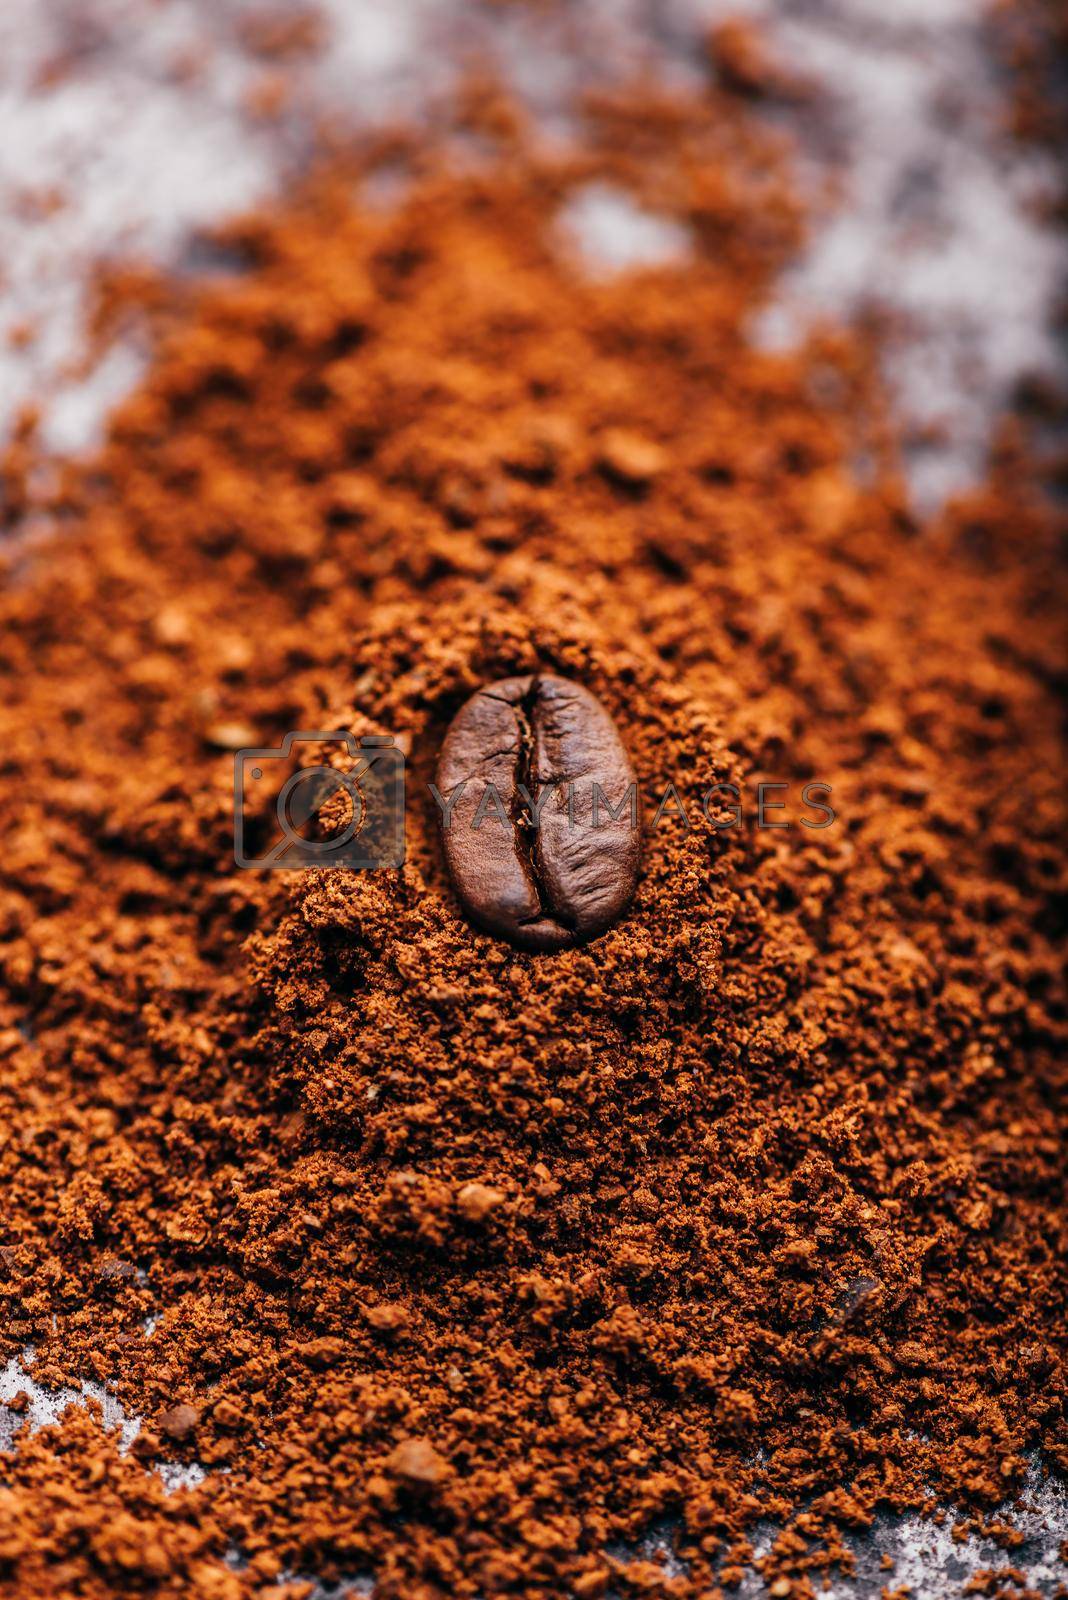 Royalty free image of Coffee bean on heap of grinded coffee by Seva_blsv